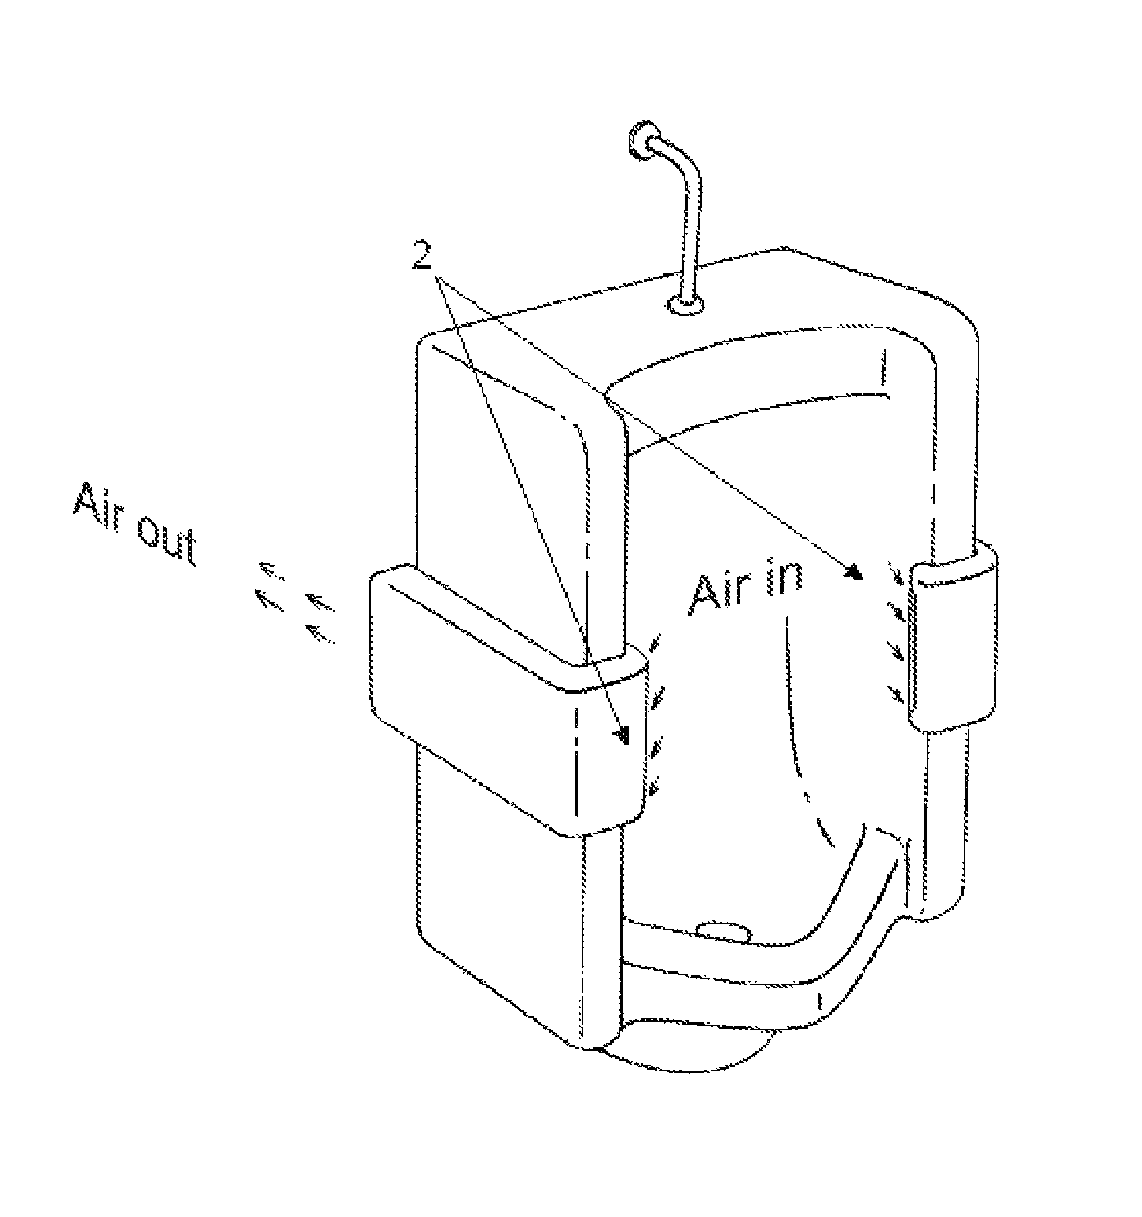 Method and apparatus for disinfecting and deodorizing a toilet system